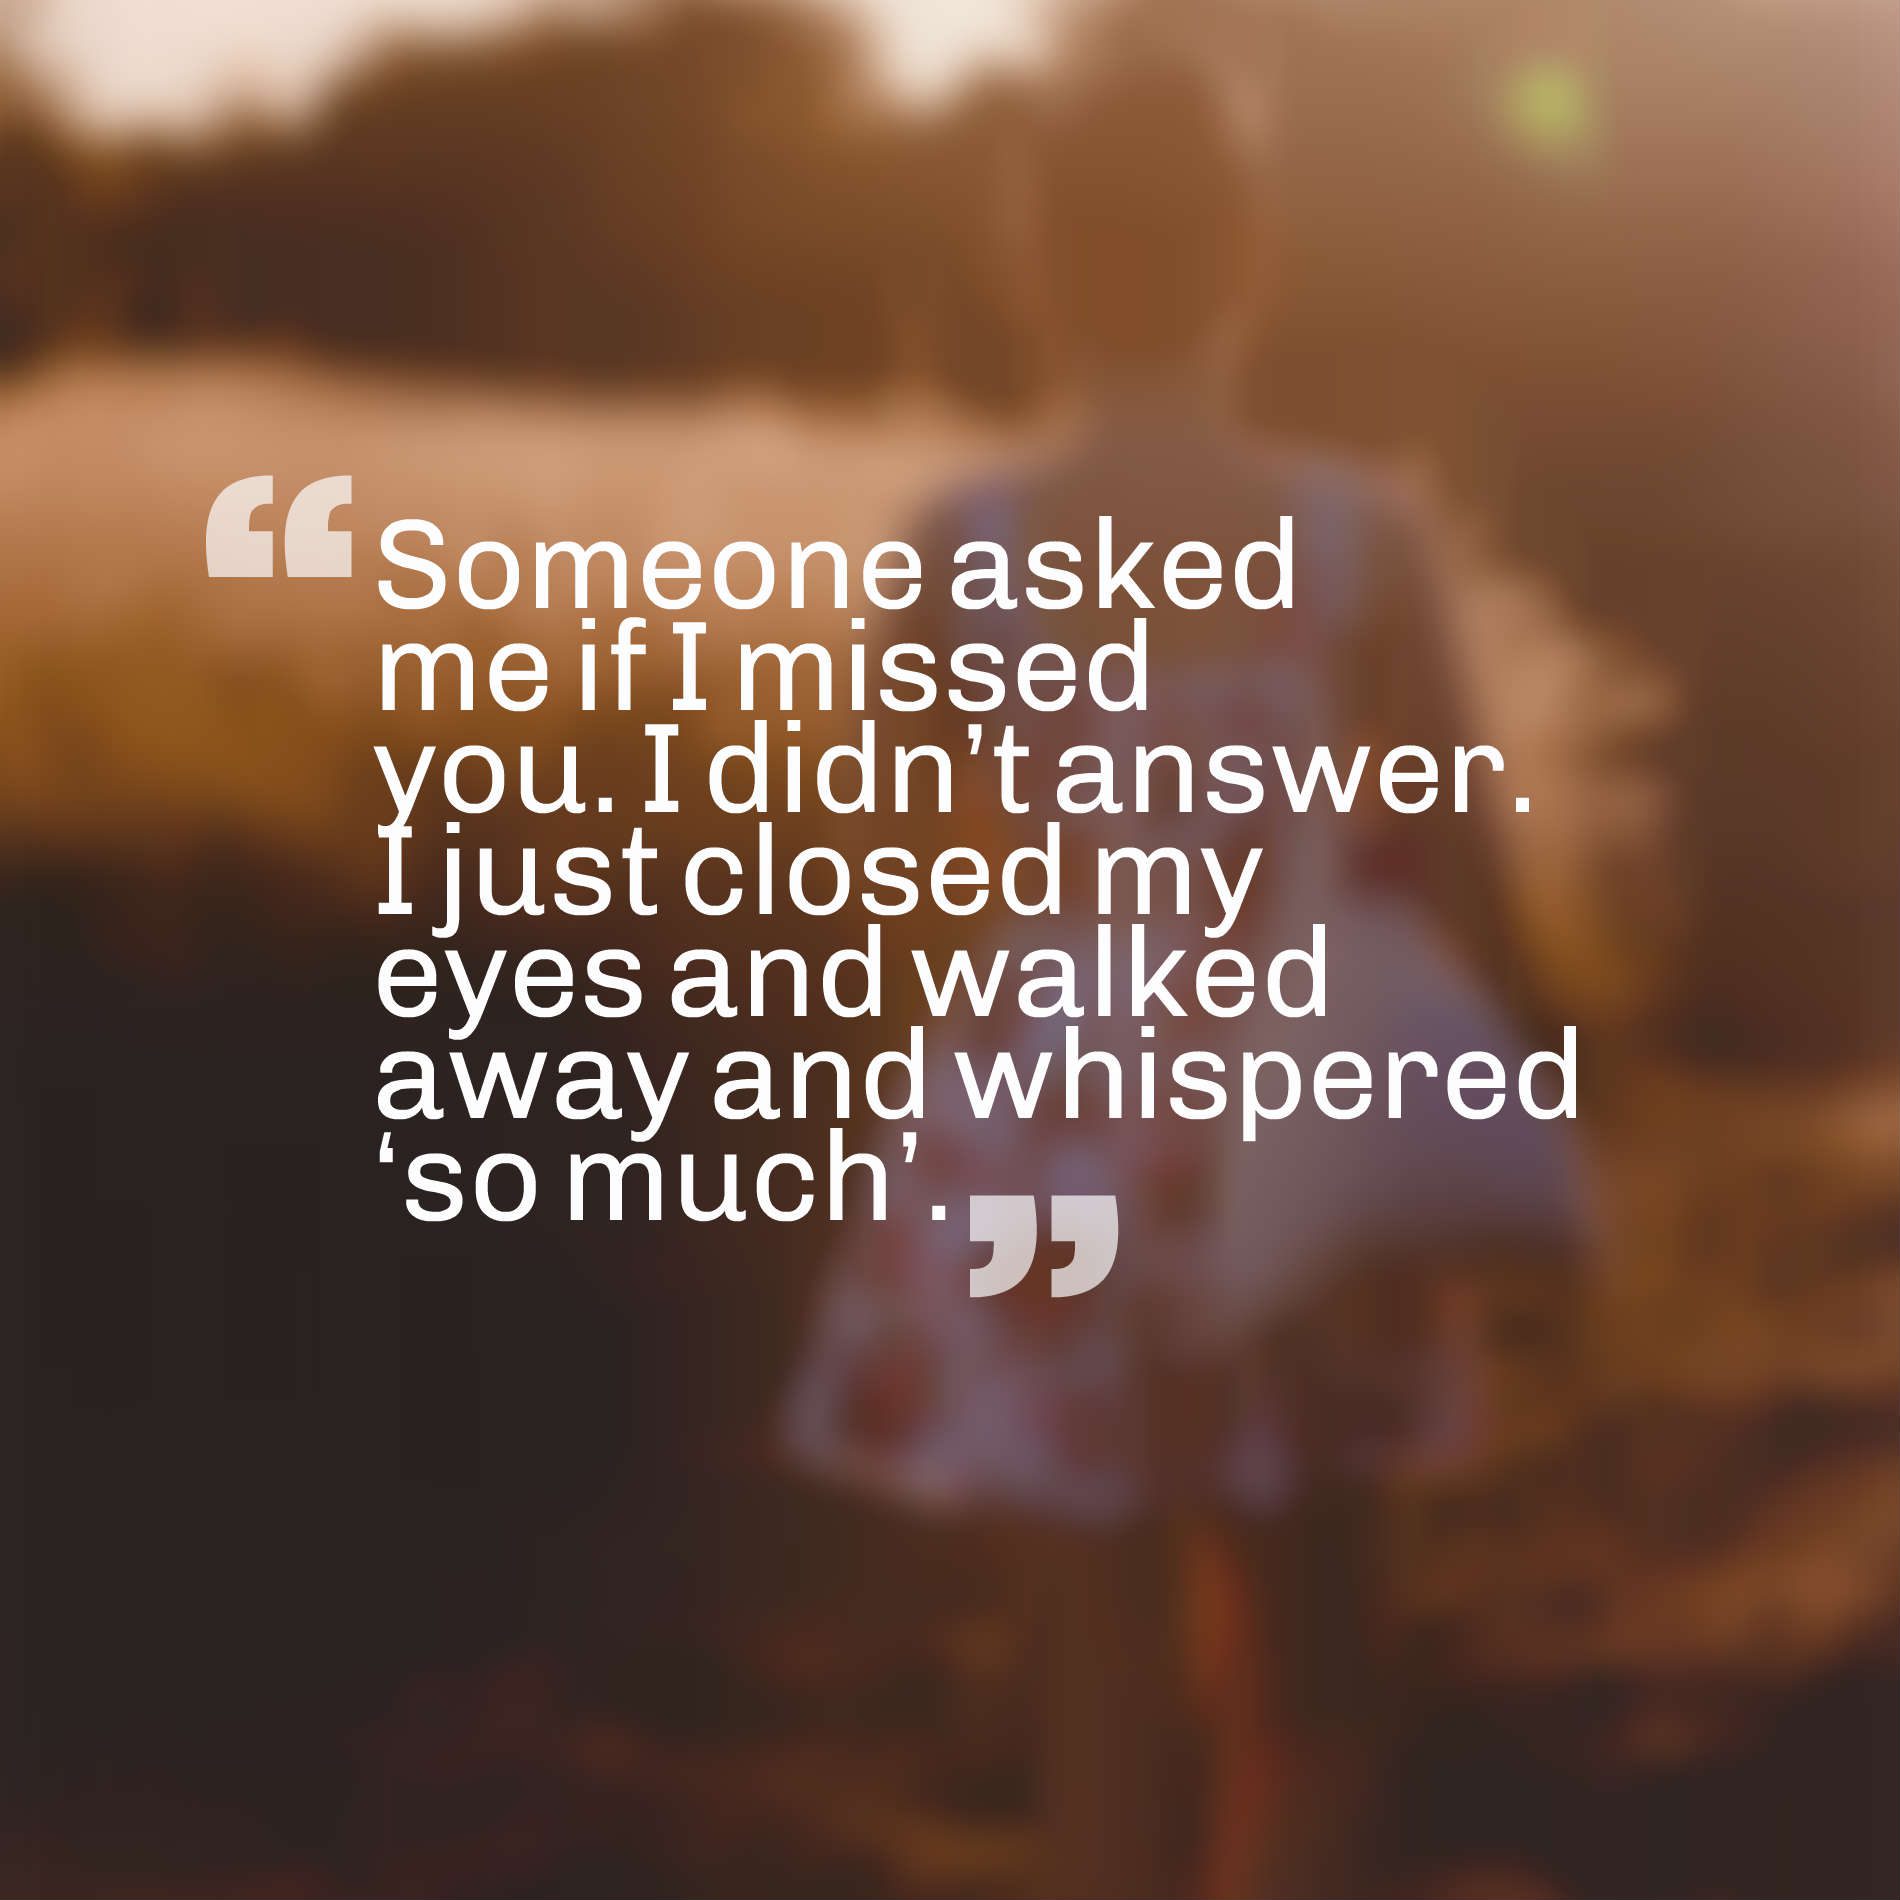 Someone asked me if I missed you. I didn’t answer. I just closed my eyes and walked away and whispered ‘so much’.